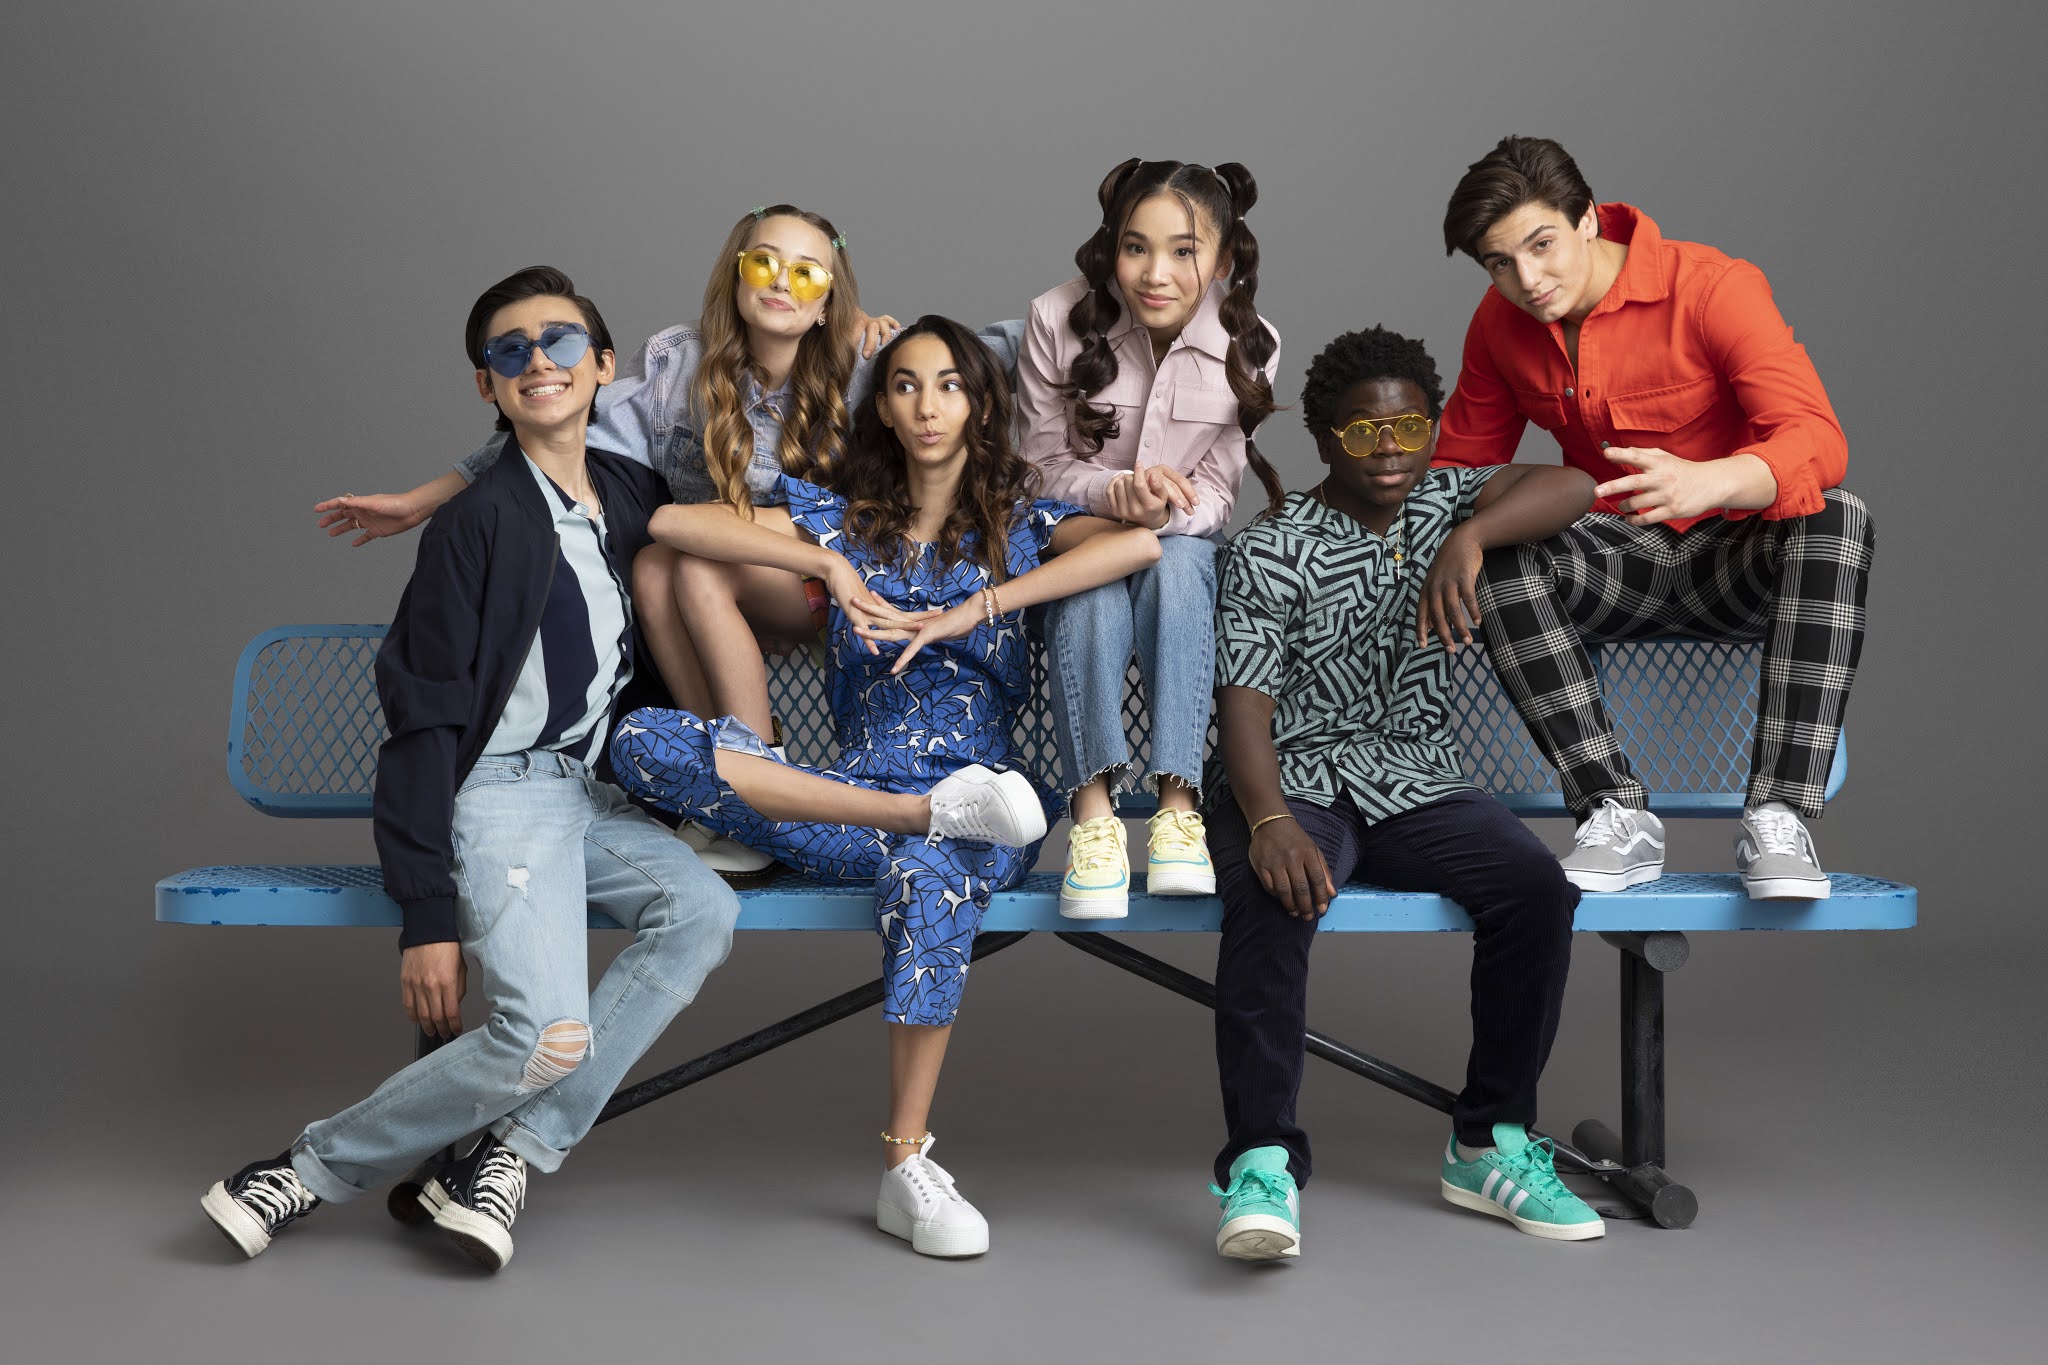 NickALive!: YTV in Canada to Premiere 'Drama Club' on Friday, March 26